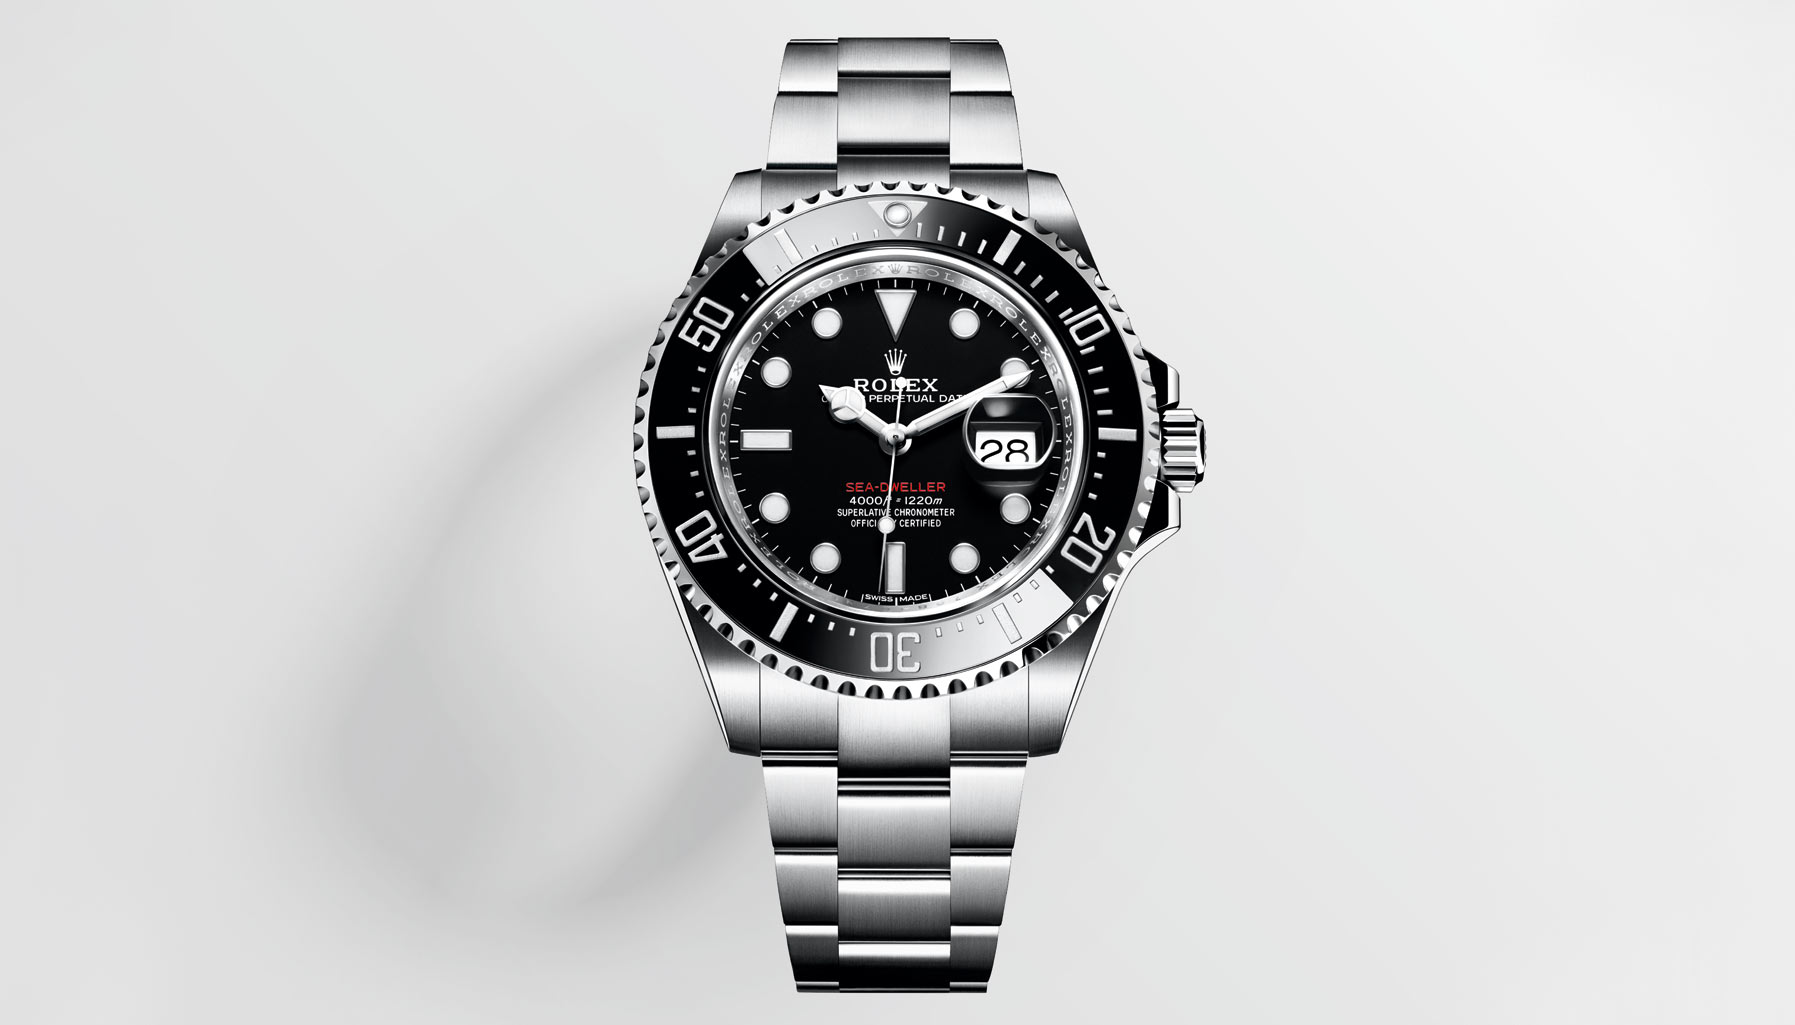 Discovering the historical depths of the Rolex Sea-Dweller | RobbReport